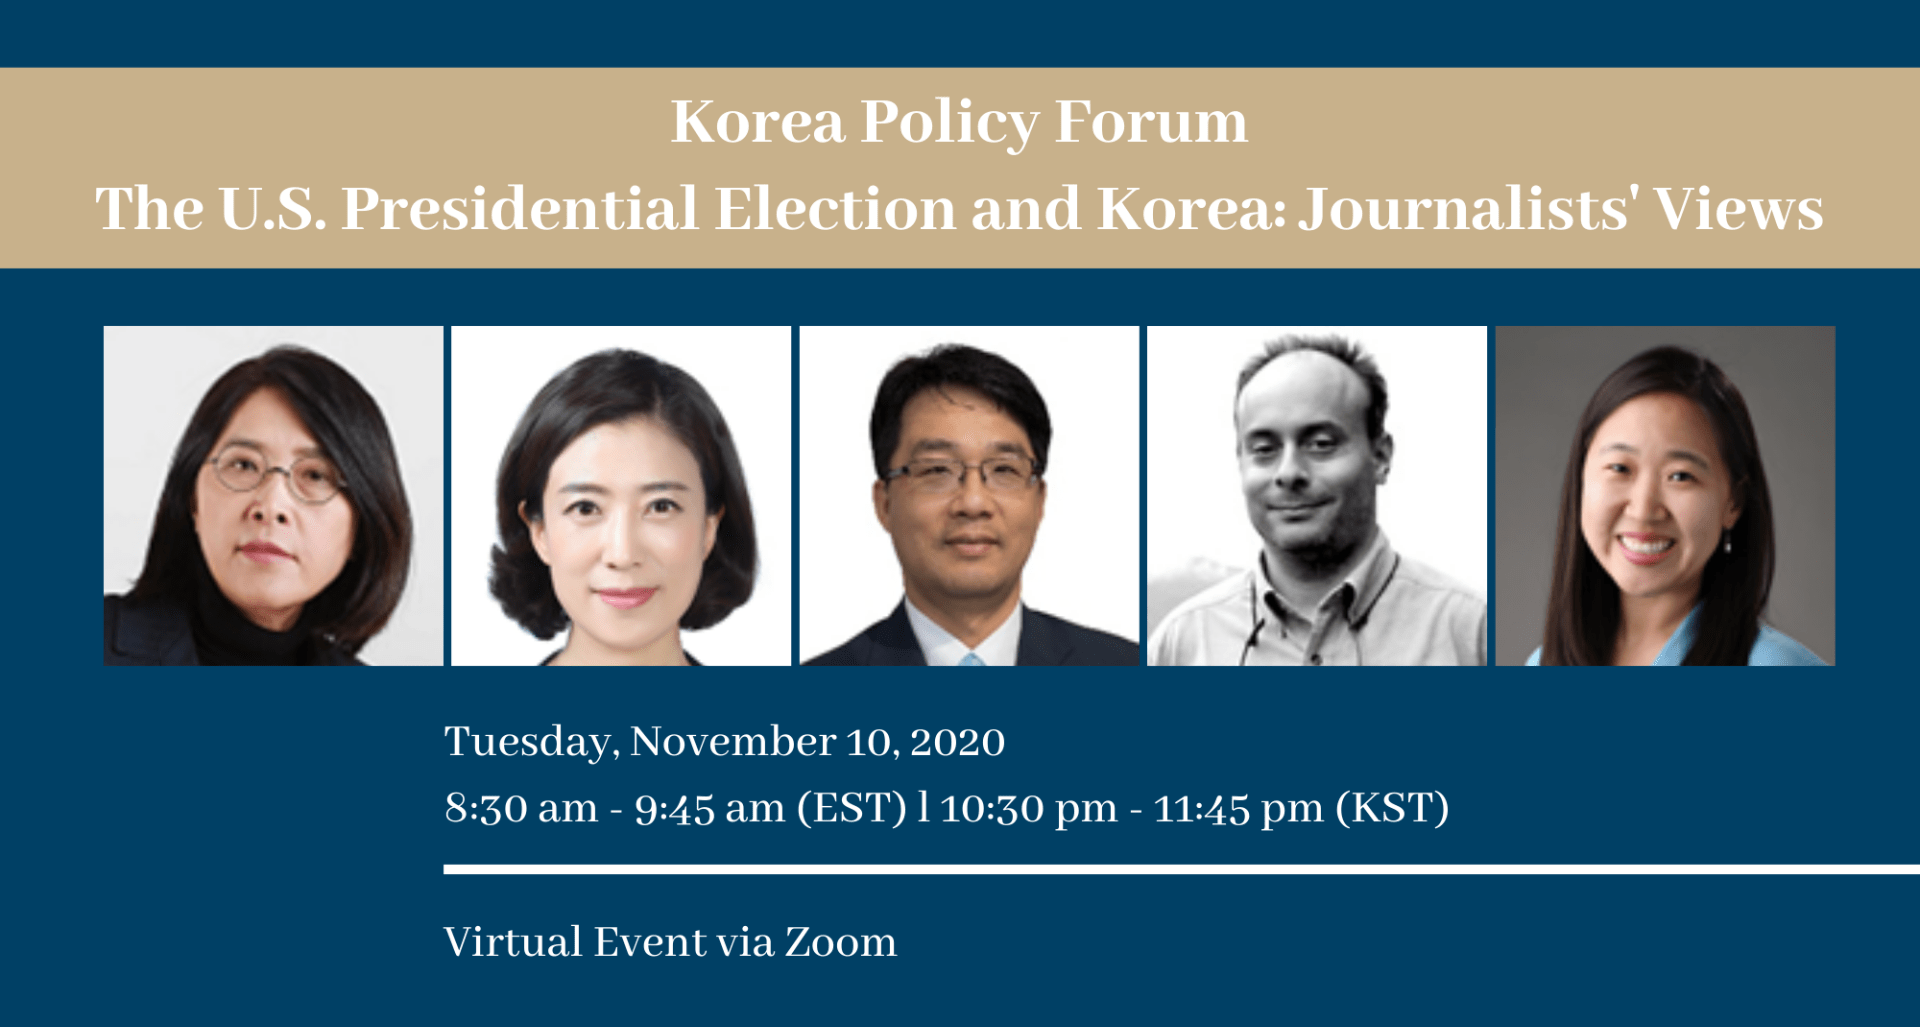 flyer with headshots of panelists; text: Korea Policy Forum The U.S. Presidential Election and Korea: Journalists' Views